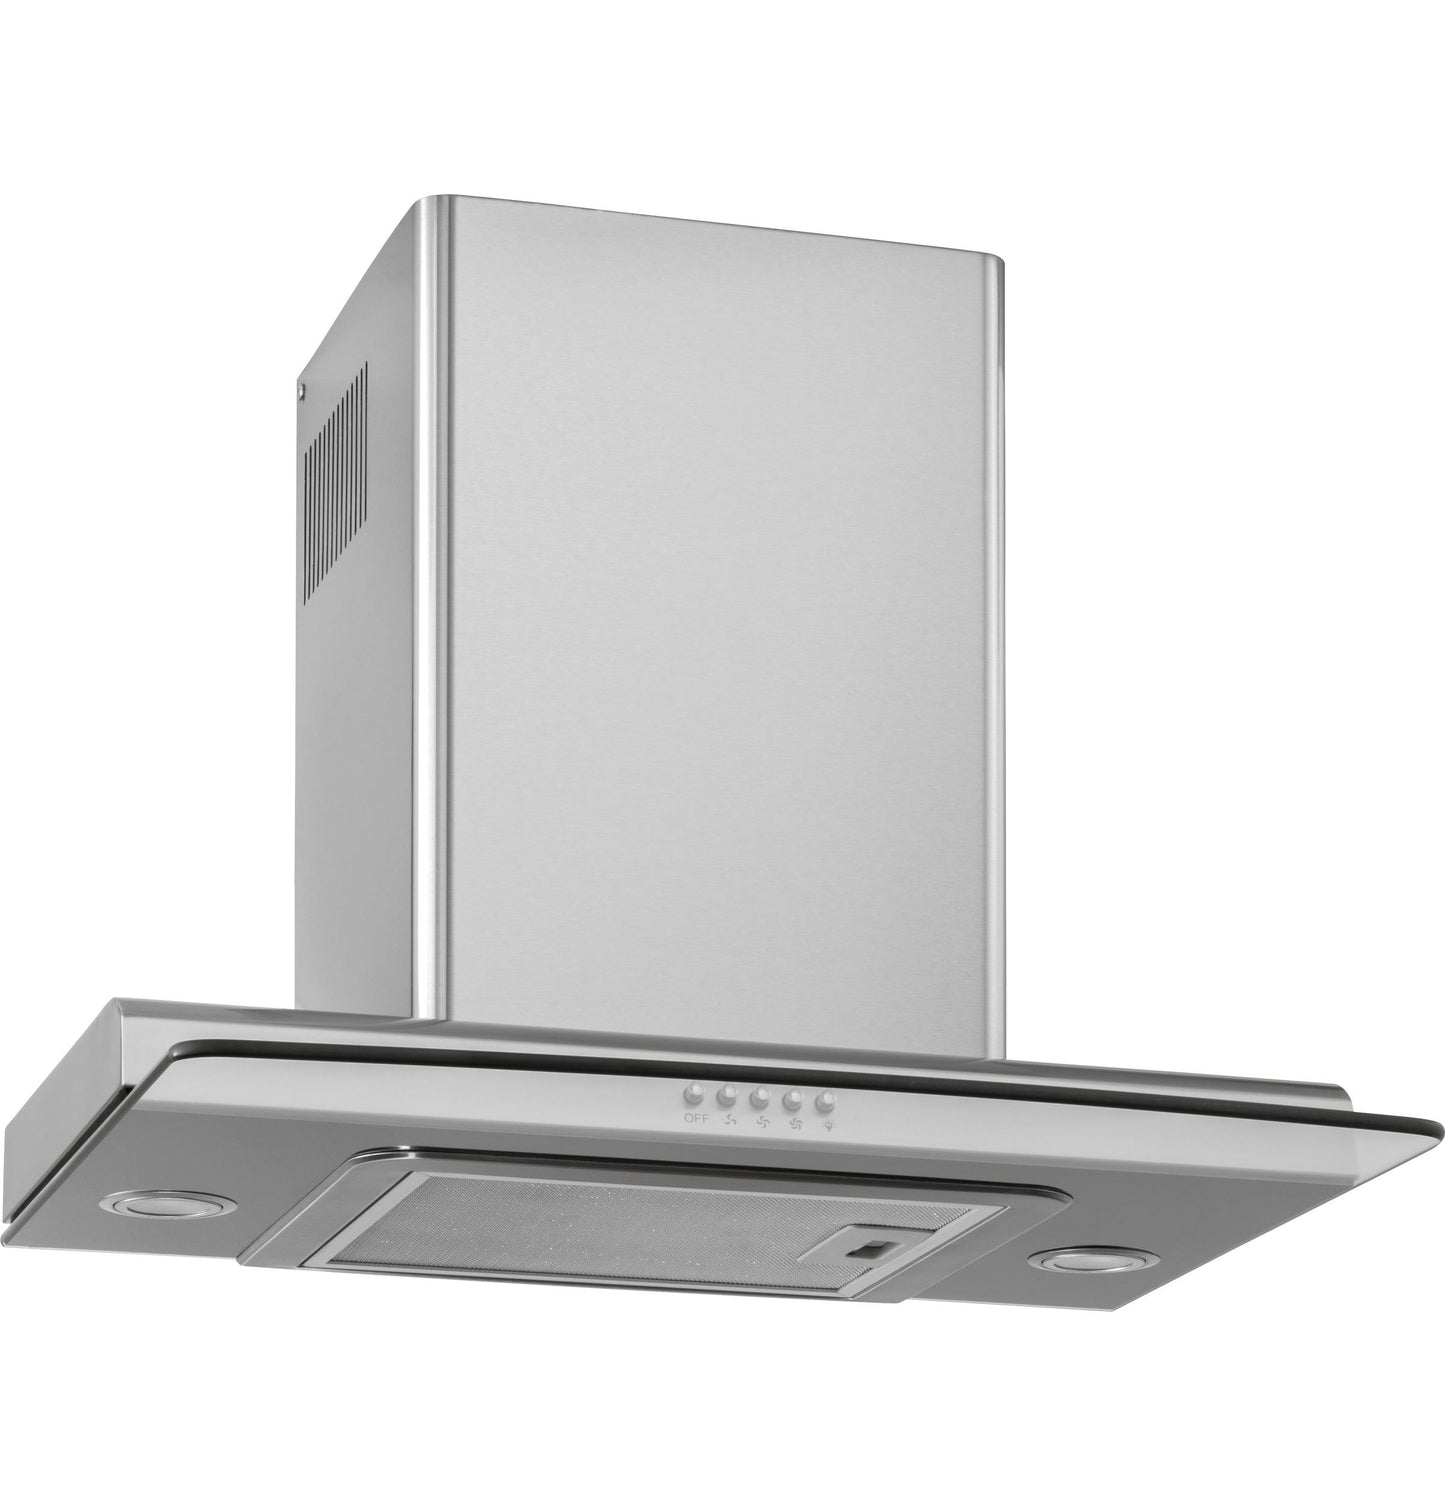 Ge Appliances UVW7241SNSS 24" Chimney Vent With Tempered Glass